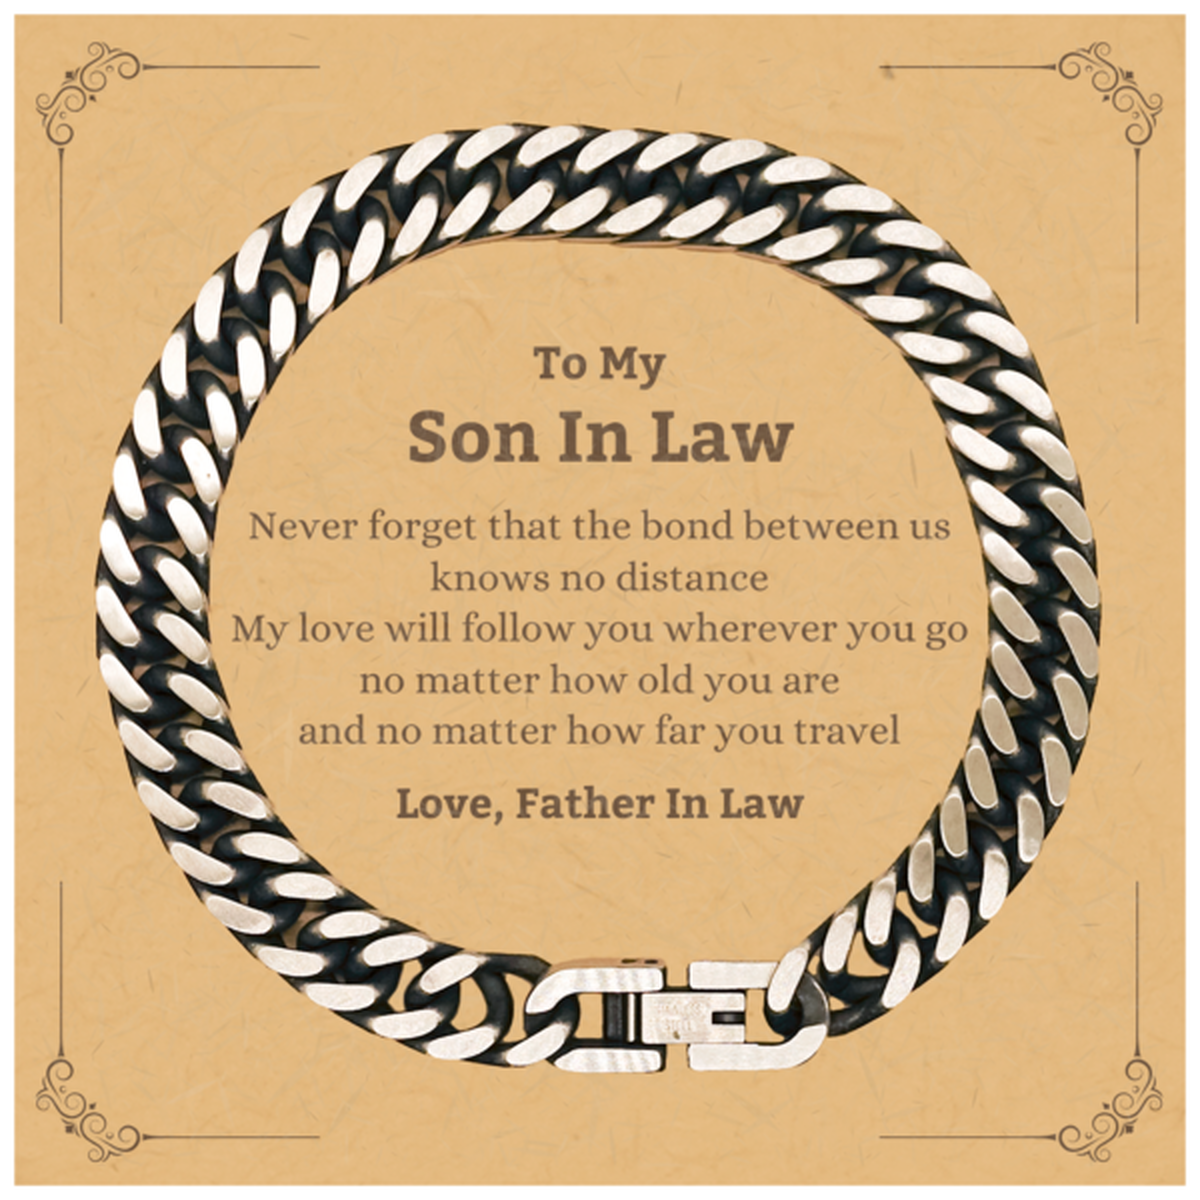 Son In Law Birthday Gifts from Father In Law, Adjustable Cuban Link Chain Bracelet for Son In Law Christmas Graduation Unique Gifts Son In Law Never forget that the bond between us knows no distance. Love, Father In Law